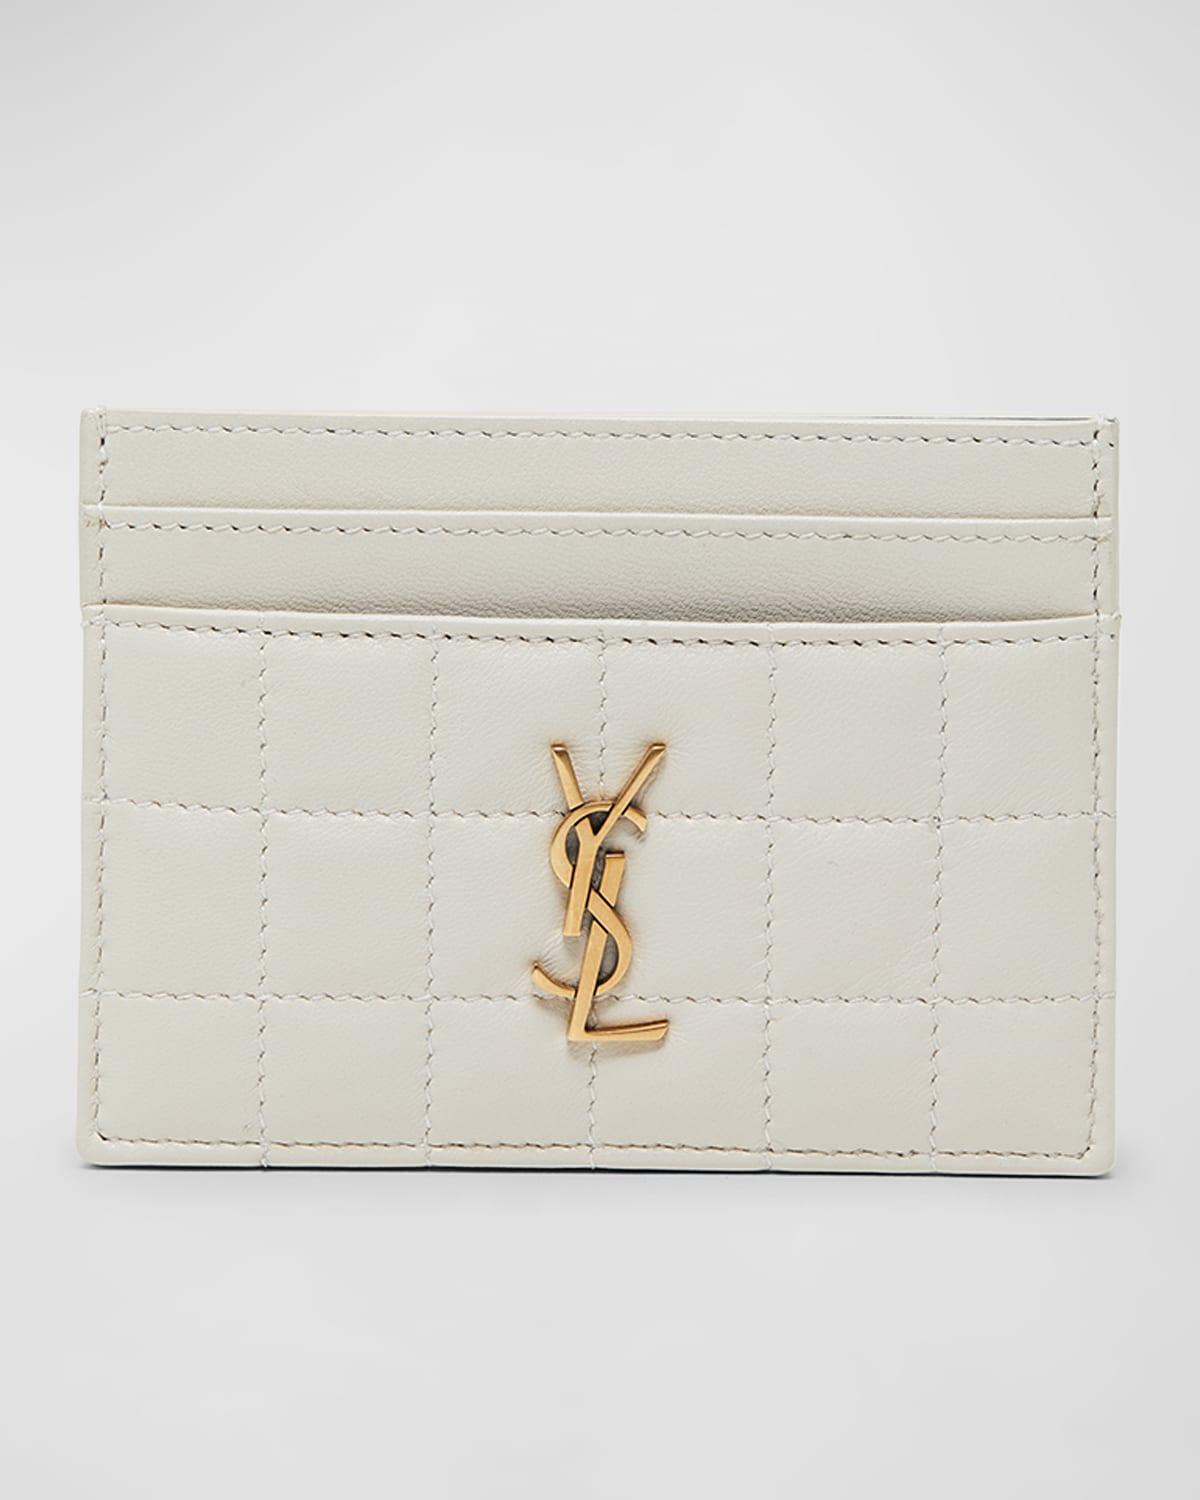 Saint Laurent Cassandra Ysl Quilted Lambskin Leather Card Holder, Fox, Women's, Small Leather Goods Card Cases & Card Holders